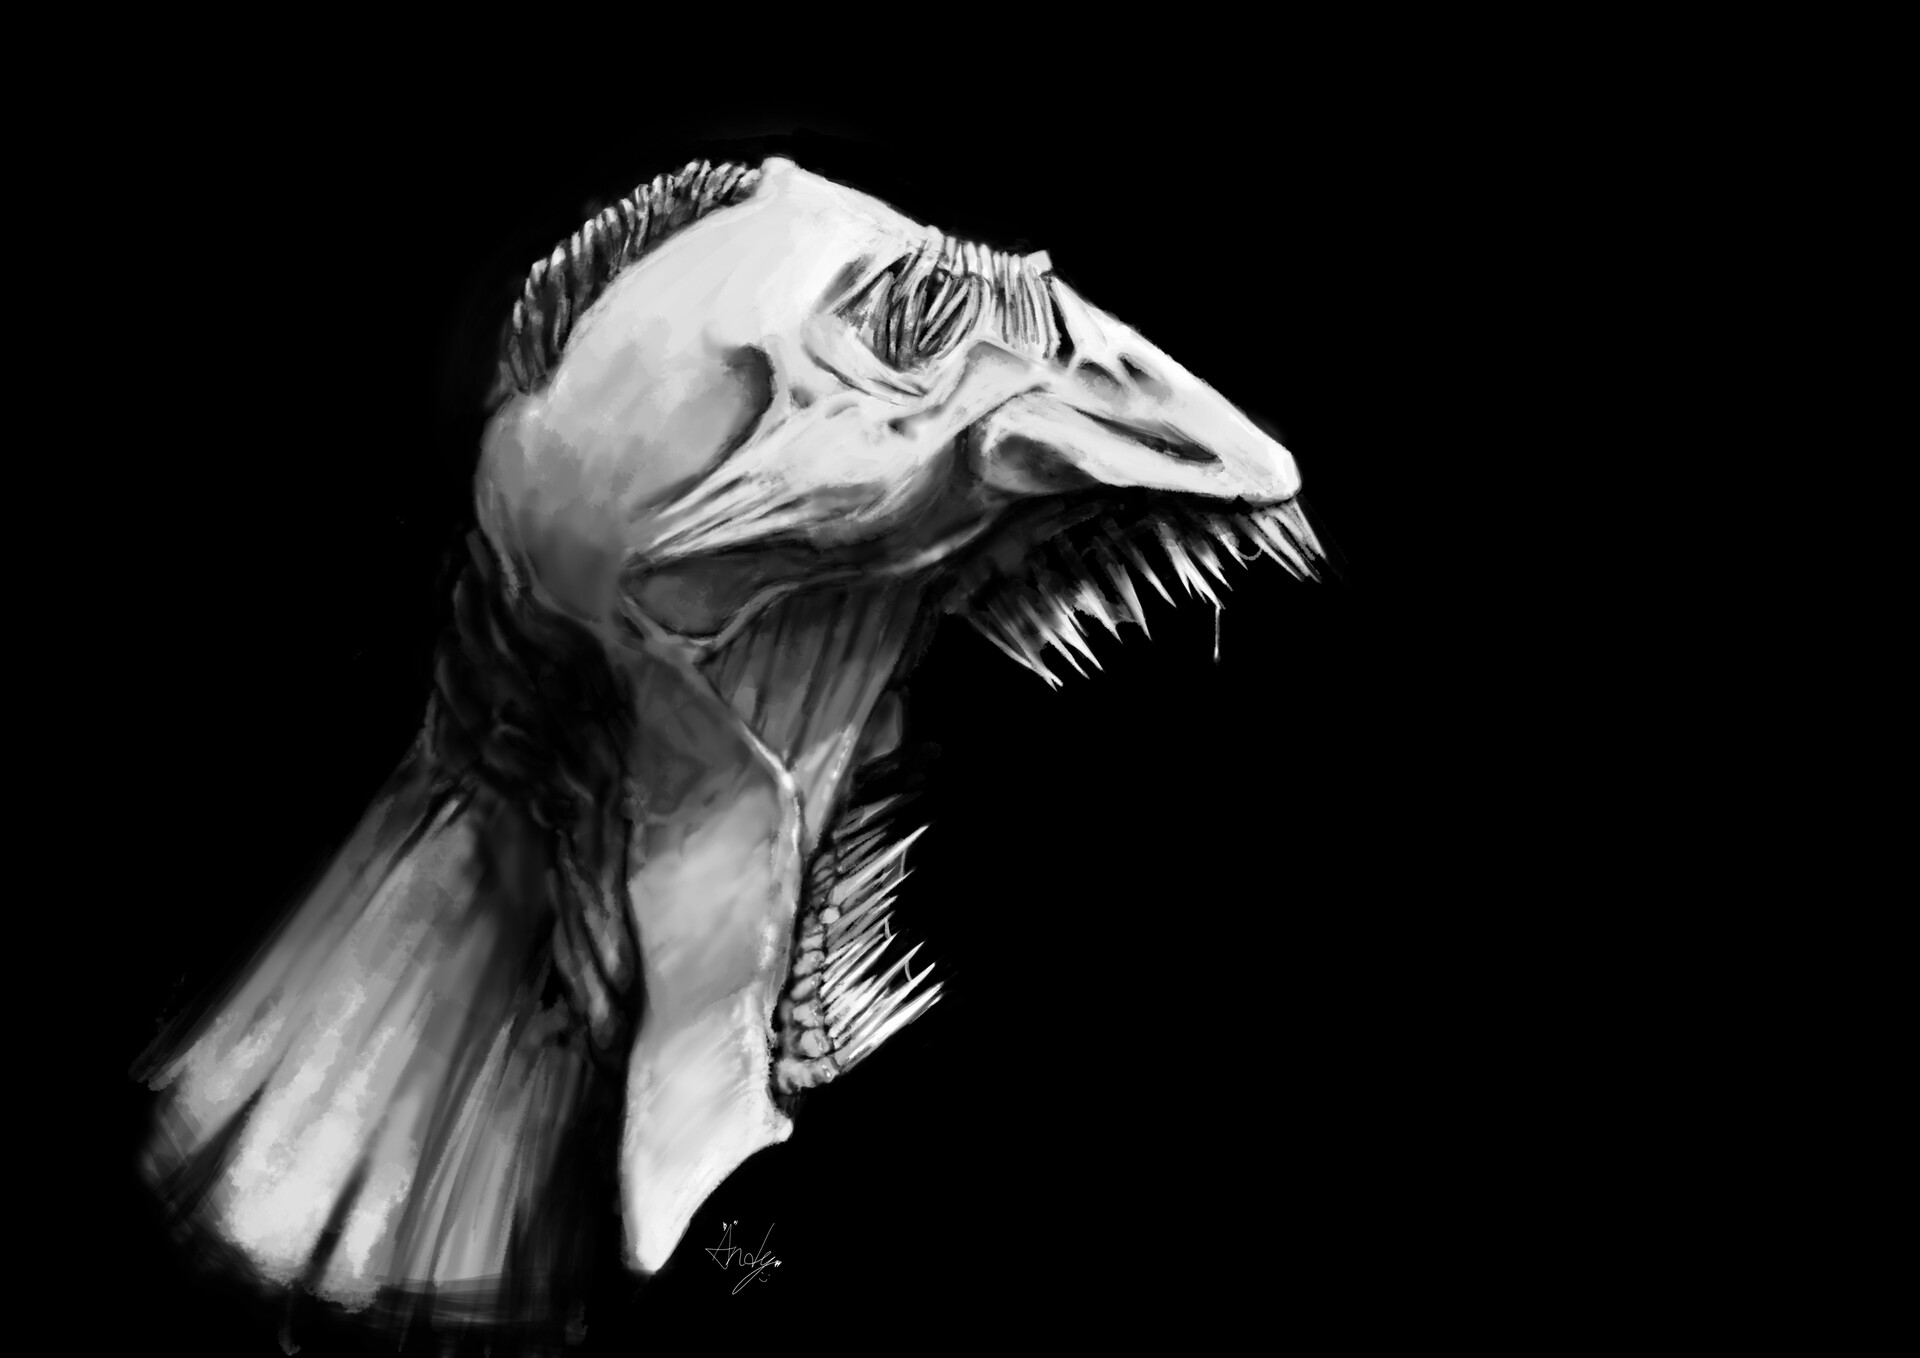 SCP-966-2 by ZeroGamingOFFICIAL on DeviantArt